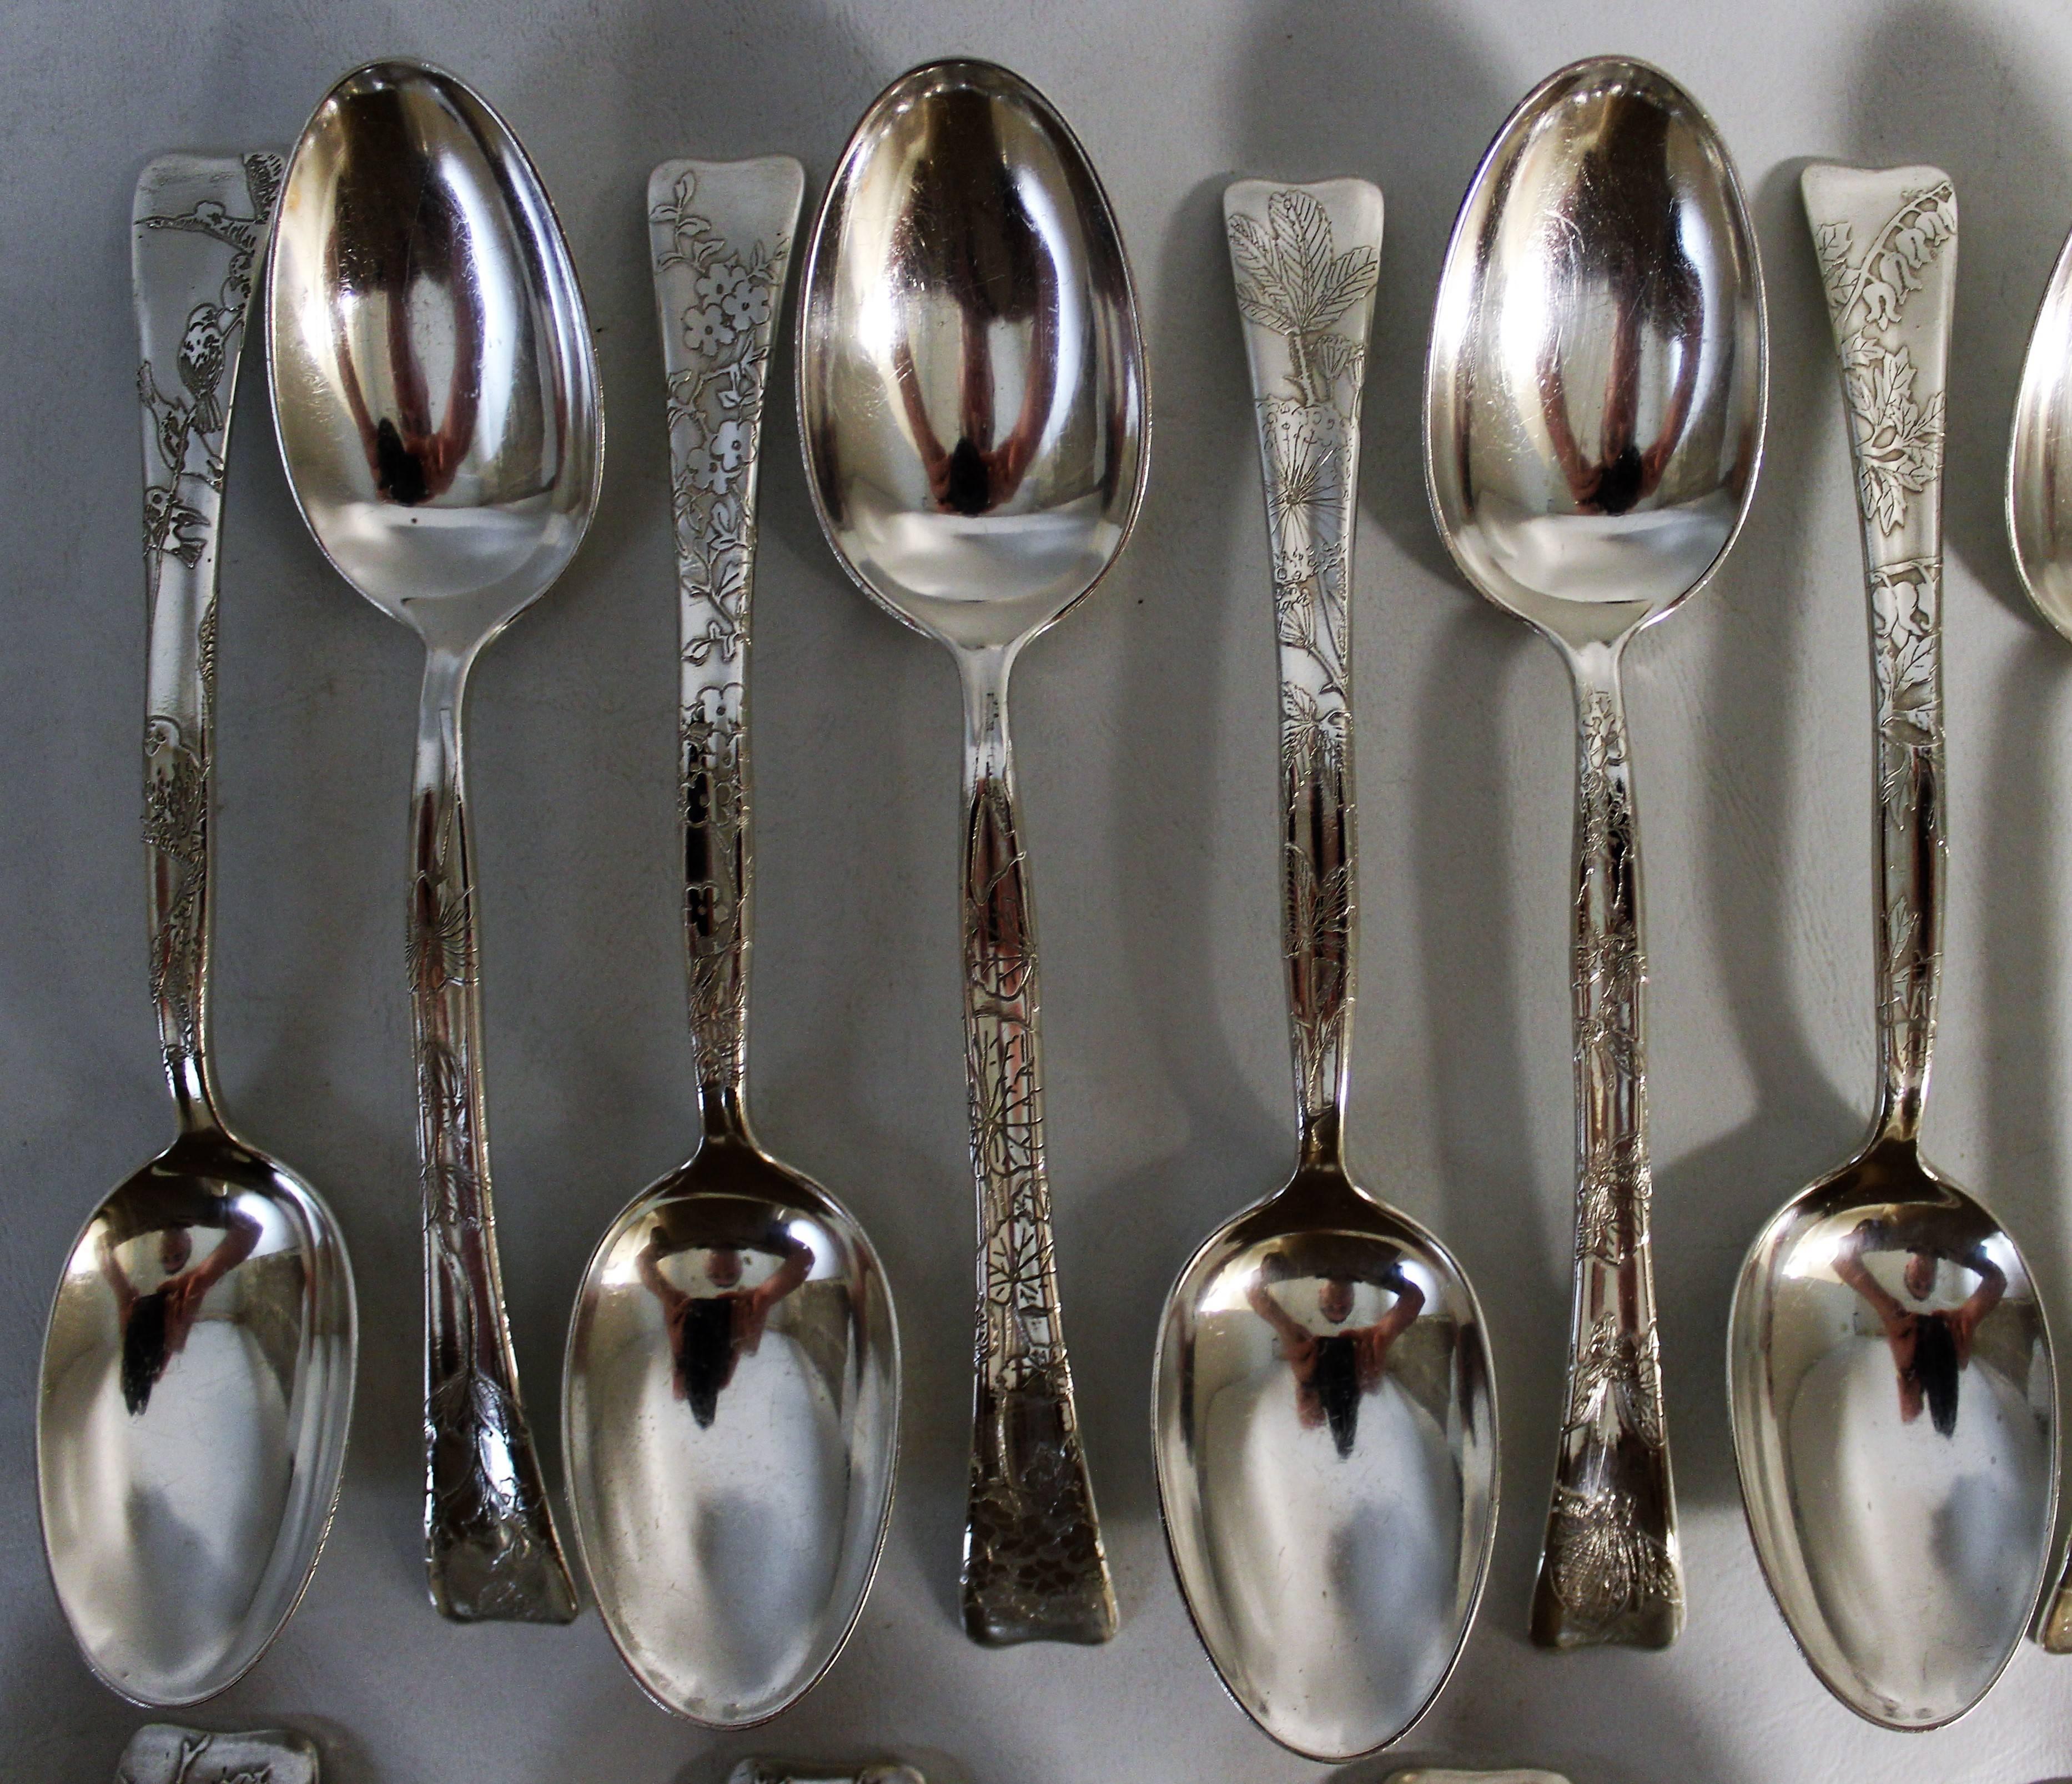 This opulently naturalistic flatware incorporates Japanese floral and foliate motifs. Edward C. Moore, Tiffany's head designer from 1869-1891, had admired Japanese art and design at the 1867 Exposition Universelle in Paris, and began working with